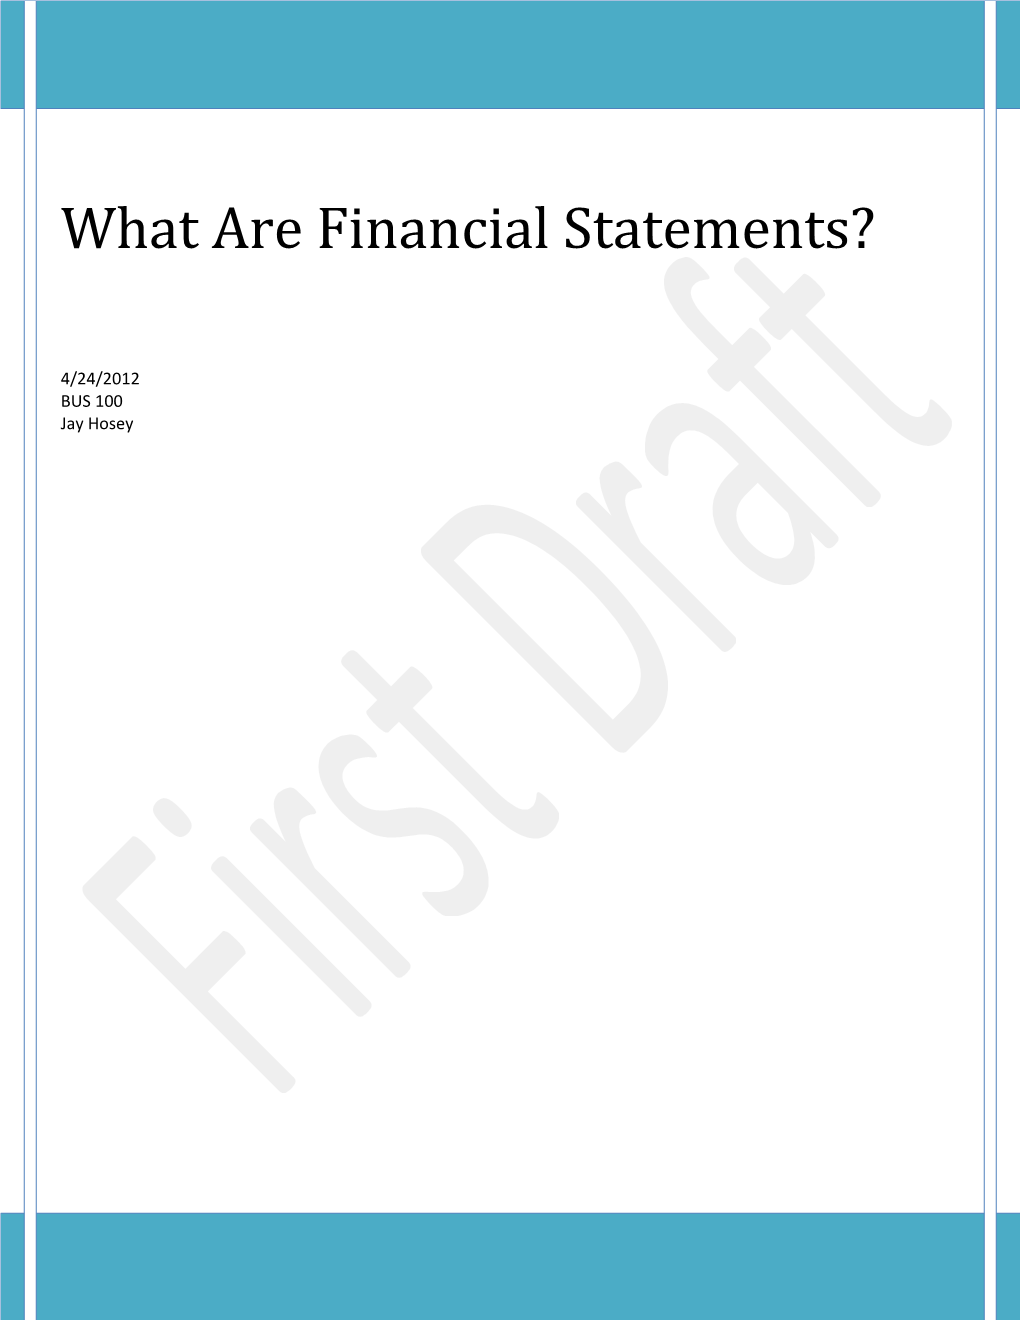 What Are Financial Statements?